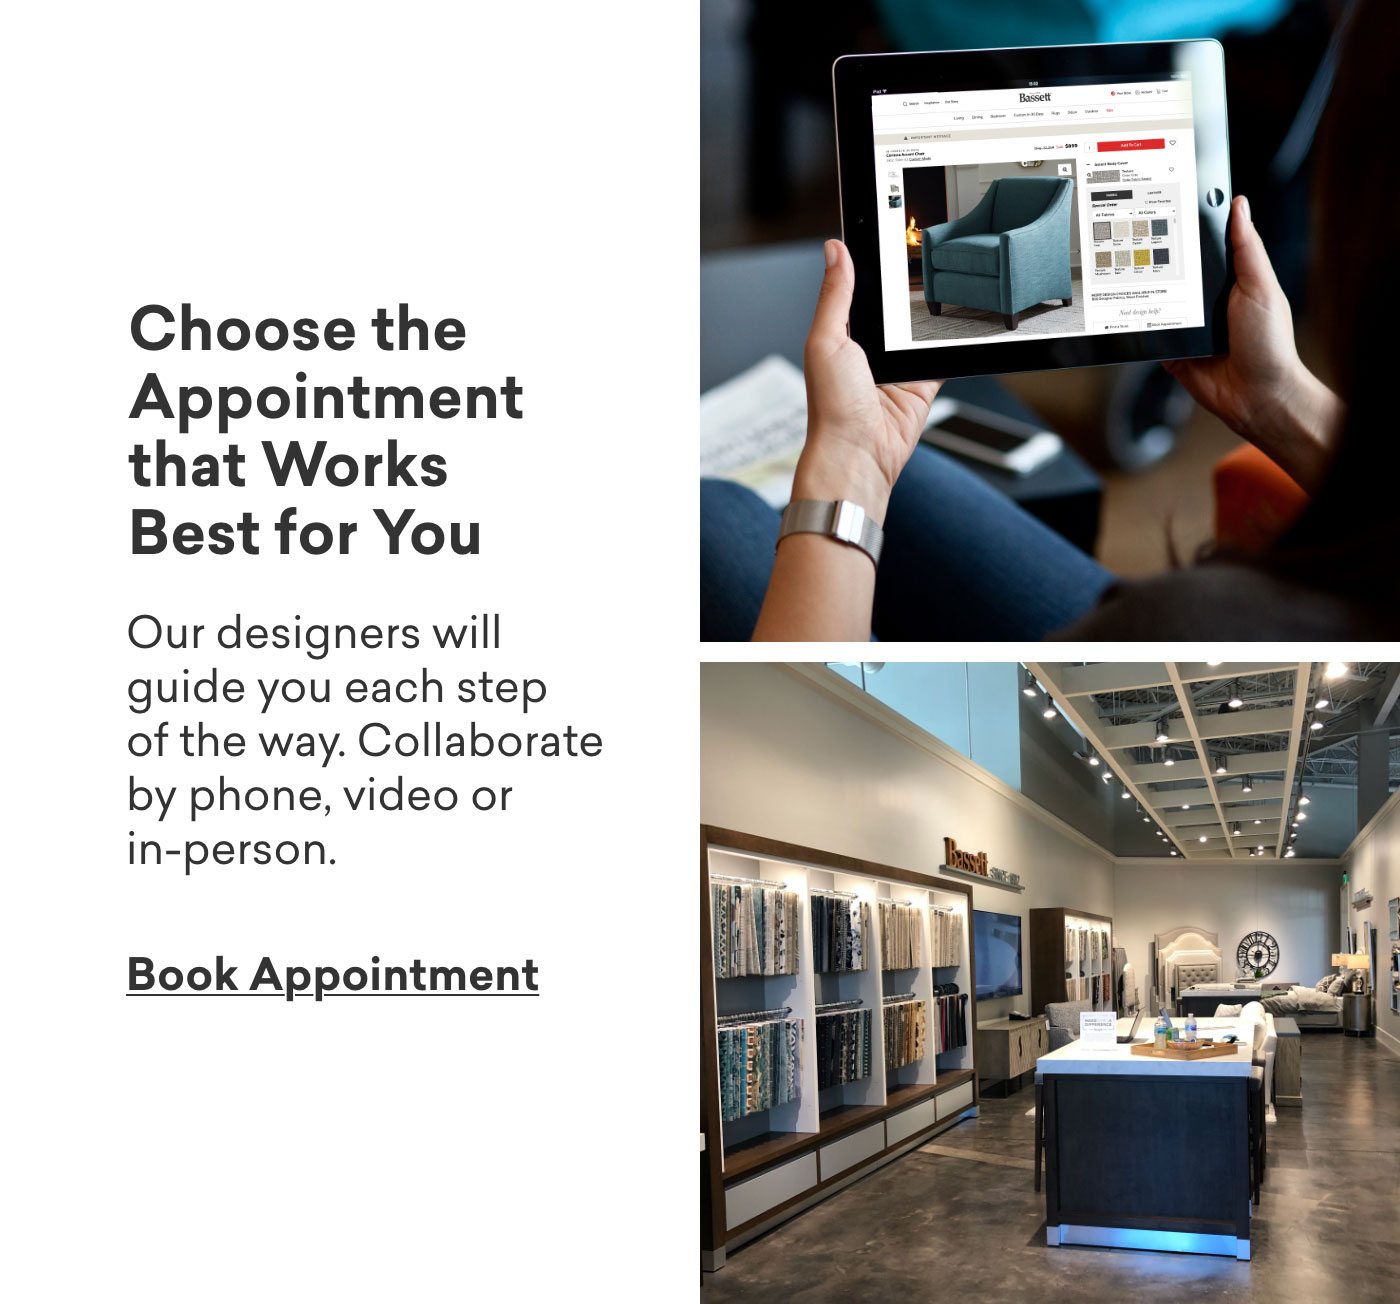 Choose the appointment that works for you. Our designers will guide you each step of the way. Collaborate by phone, video or in person. Book Appointment.